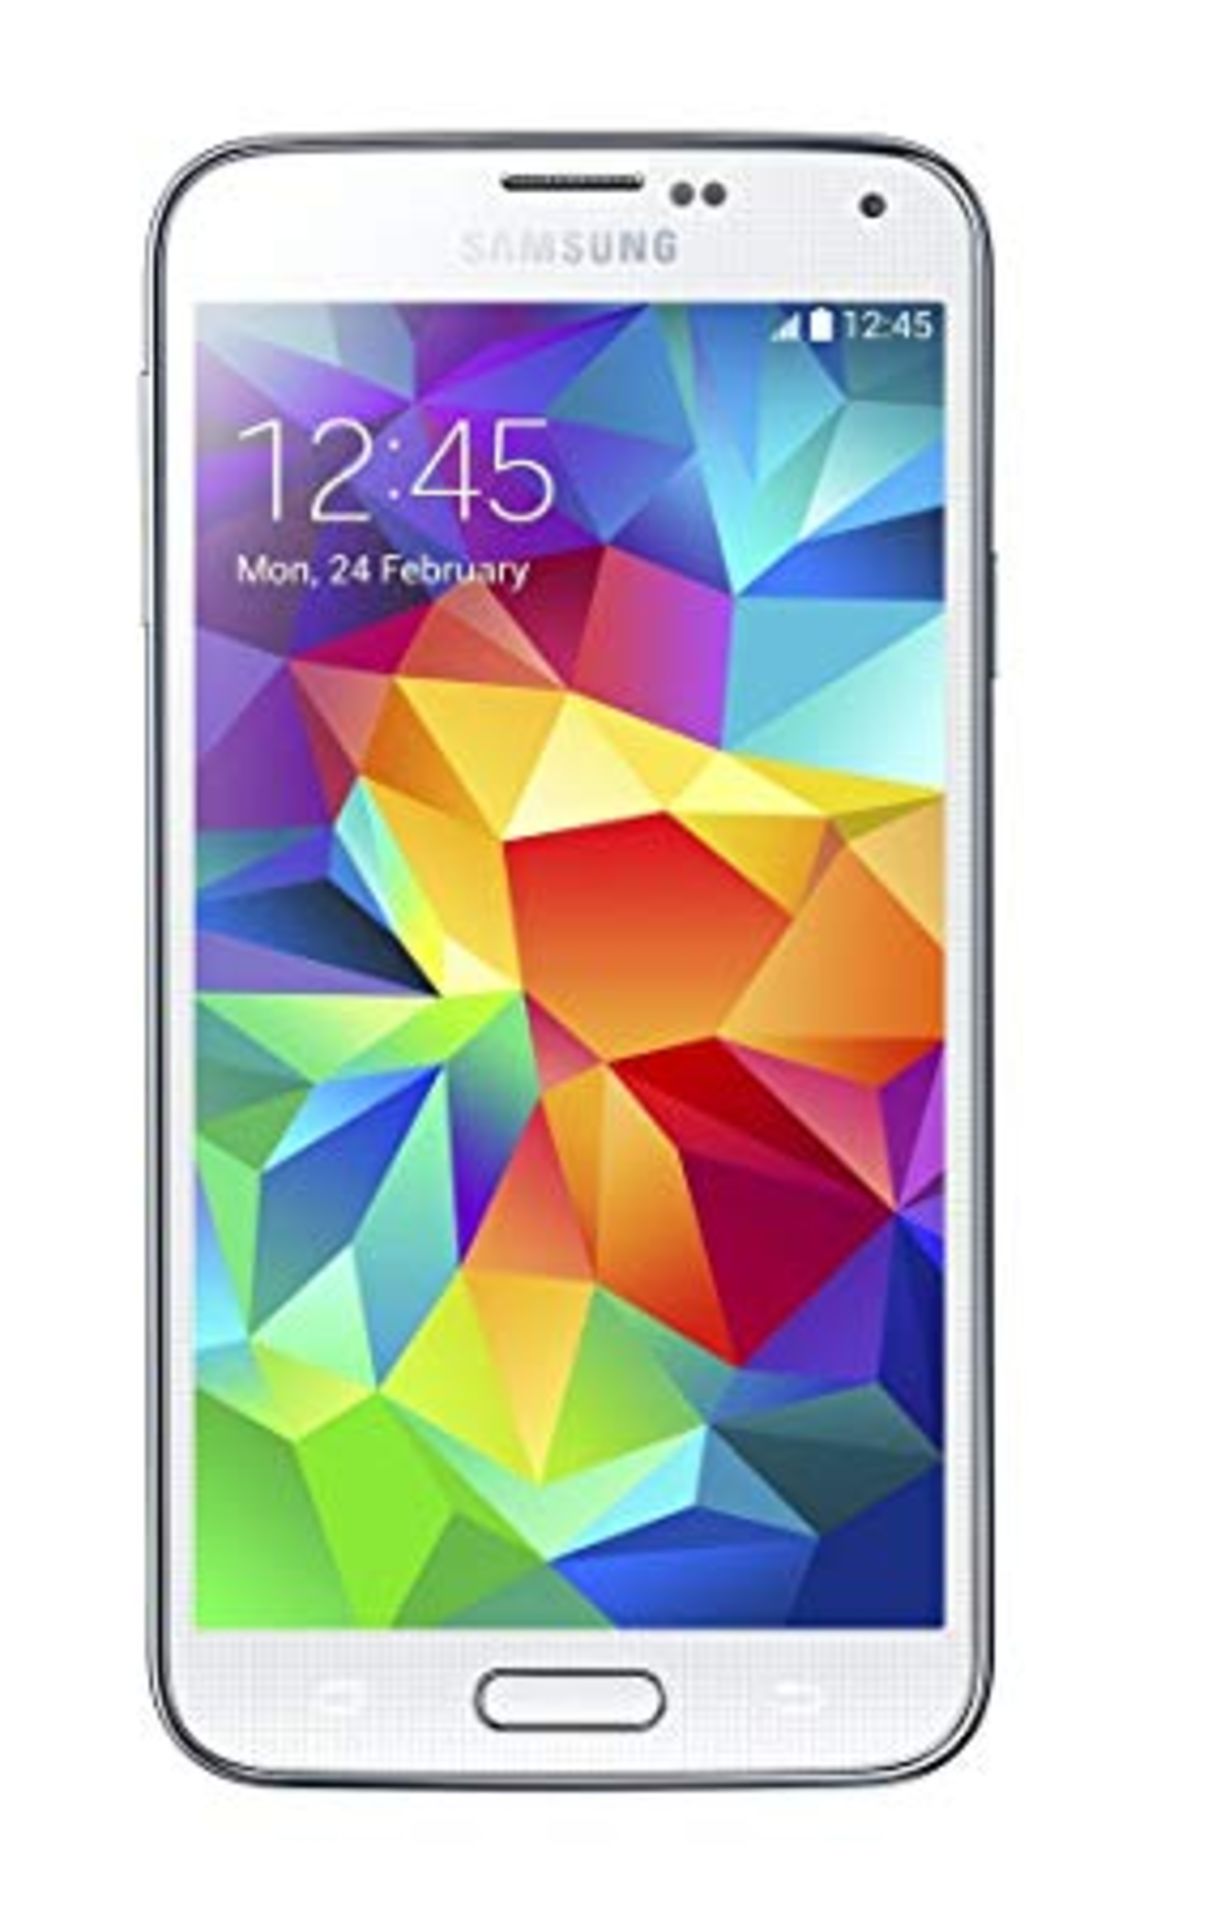 Grade A Samsung S5 ( G900F) Colours May Vary Item available approx 15 working days after sale